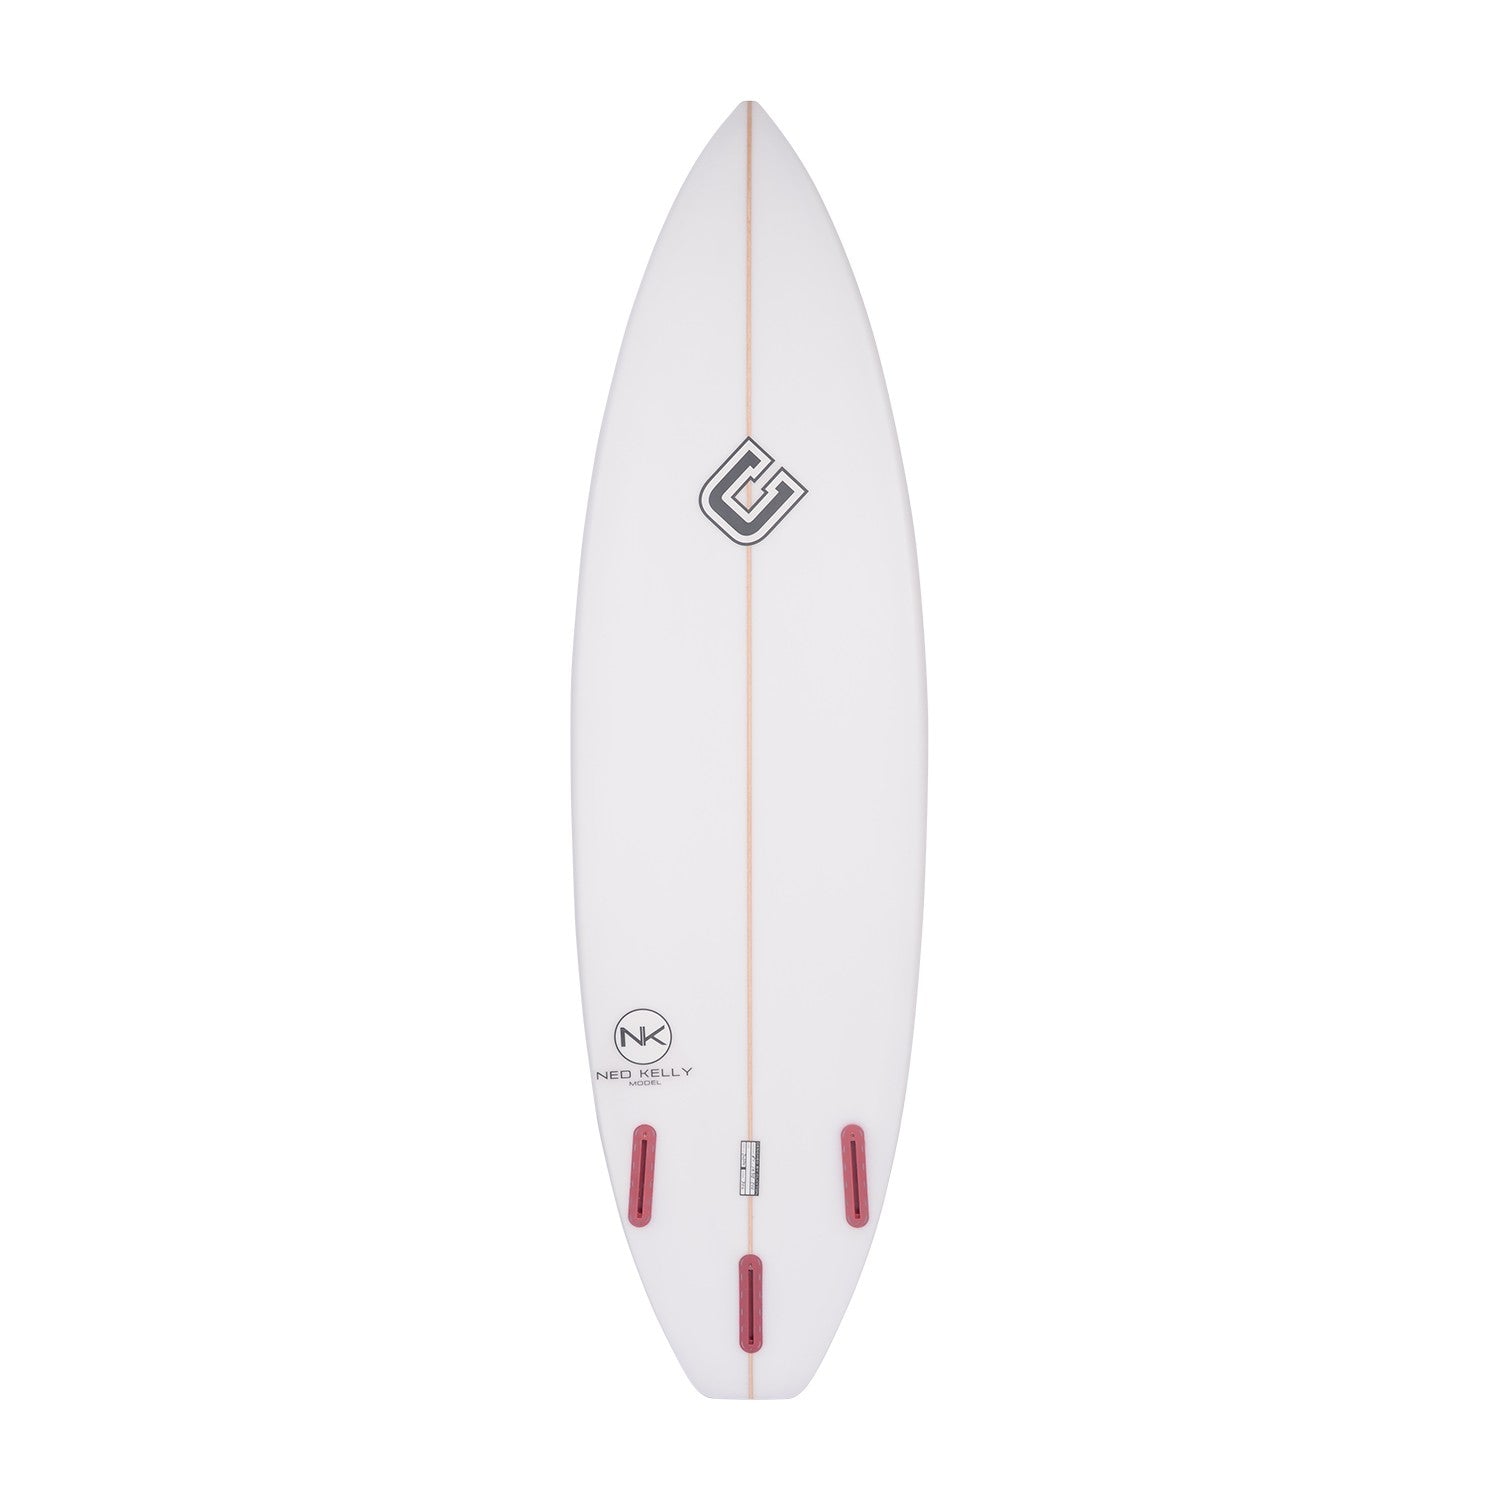 CLAYTON Surfboards - Ned Kelly (PU) Futures - 6'2